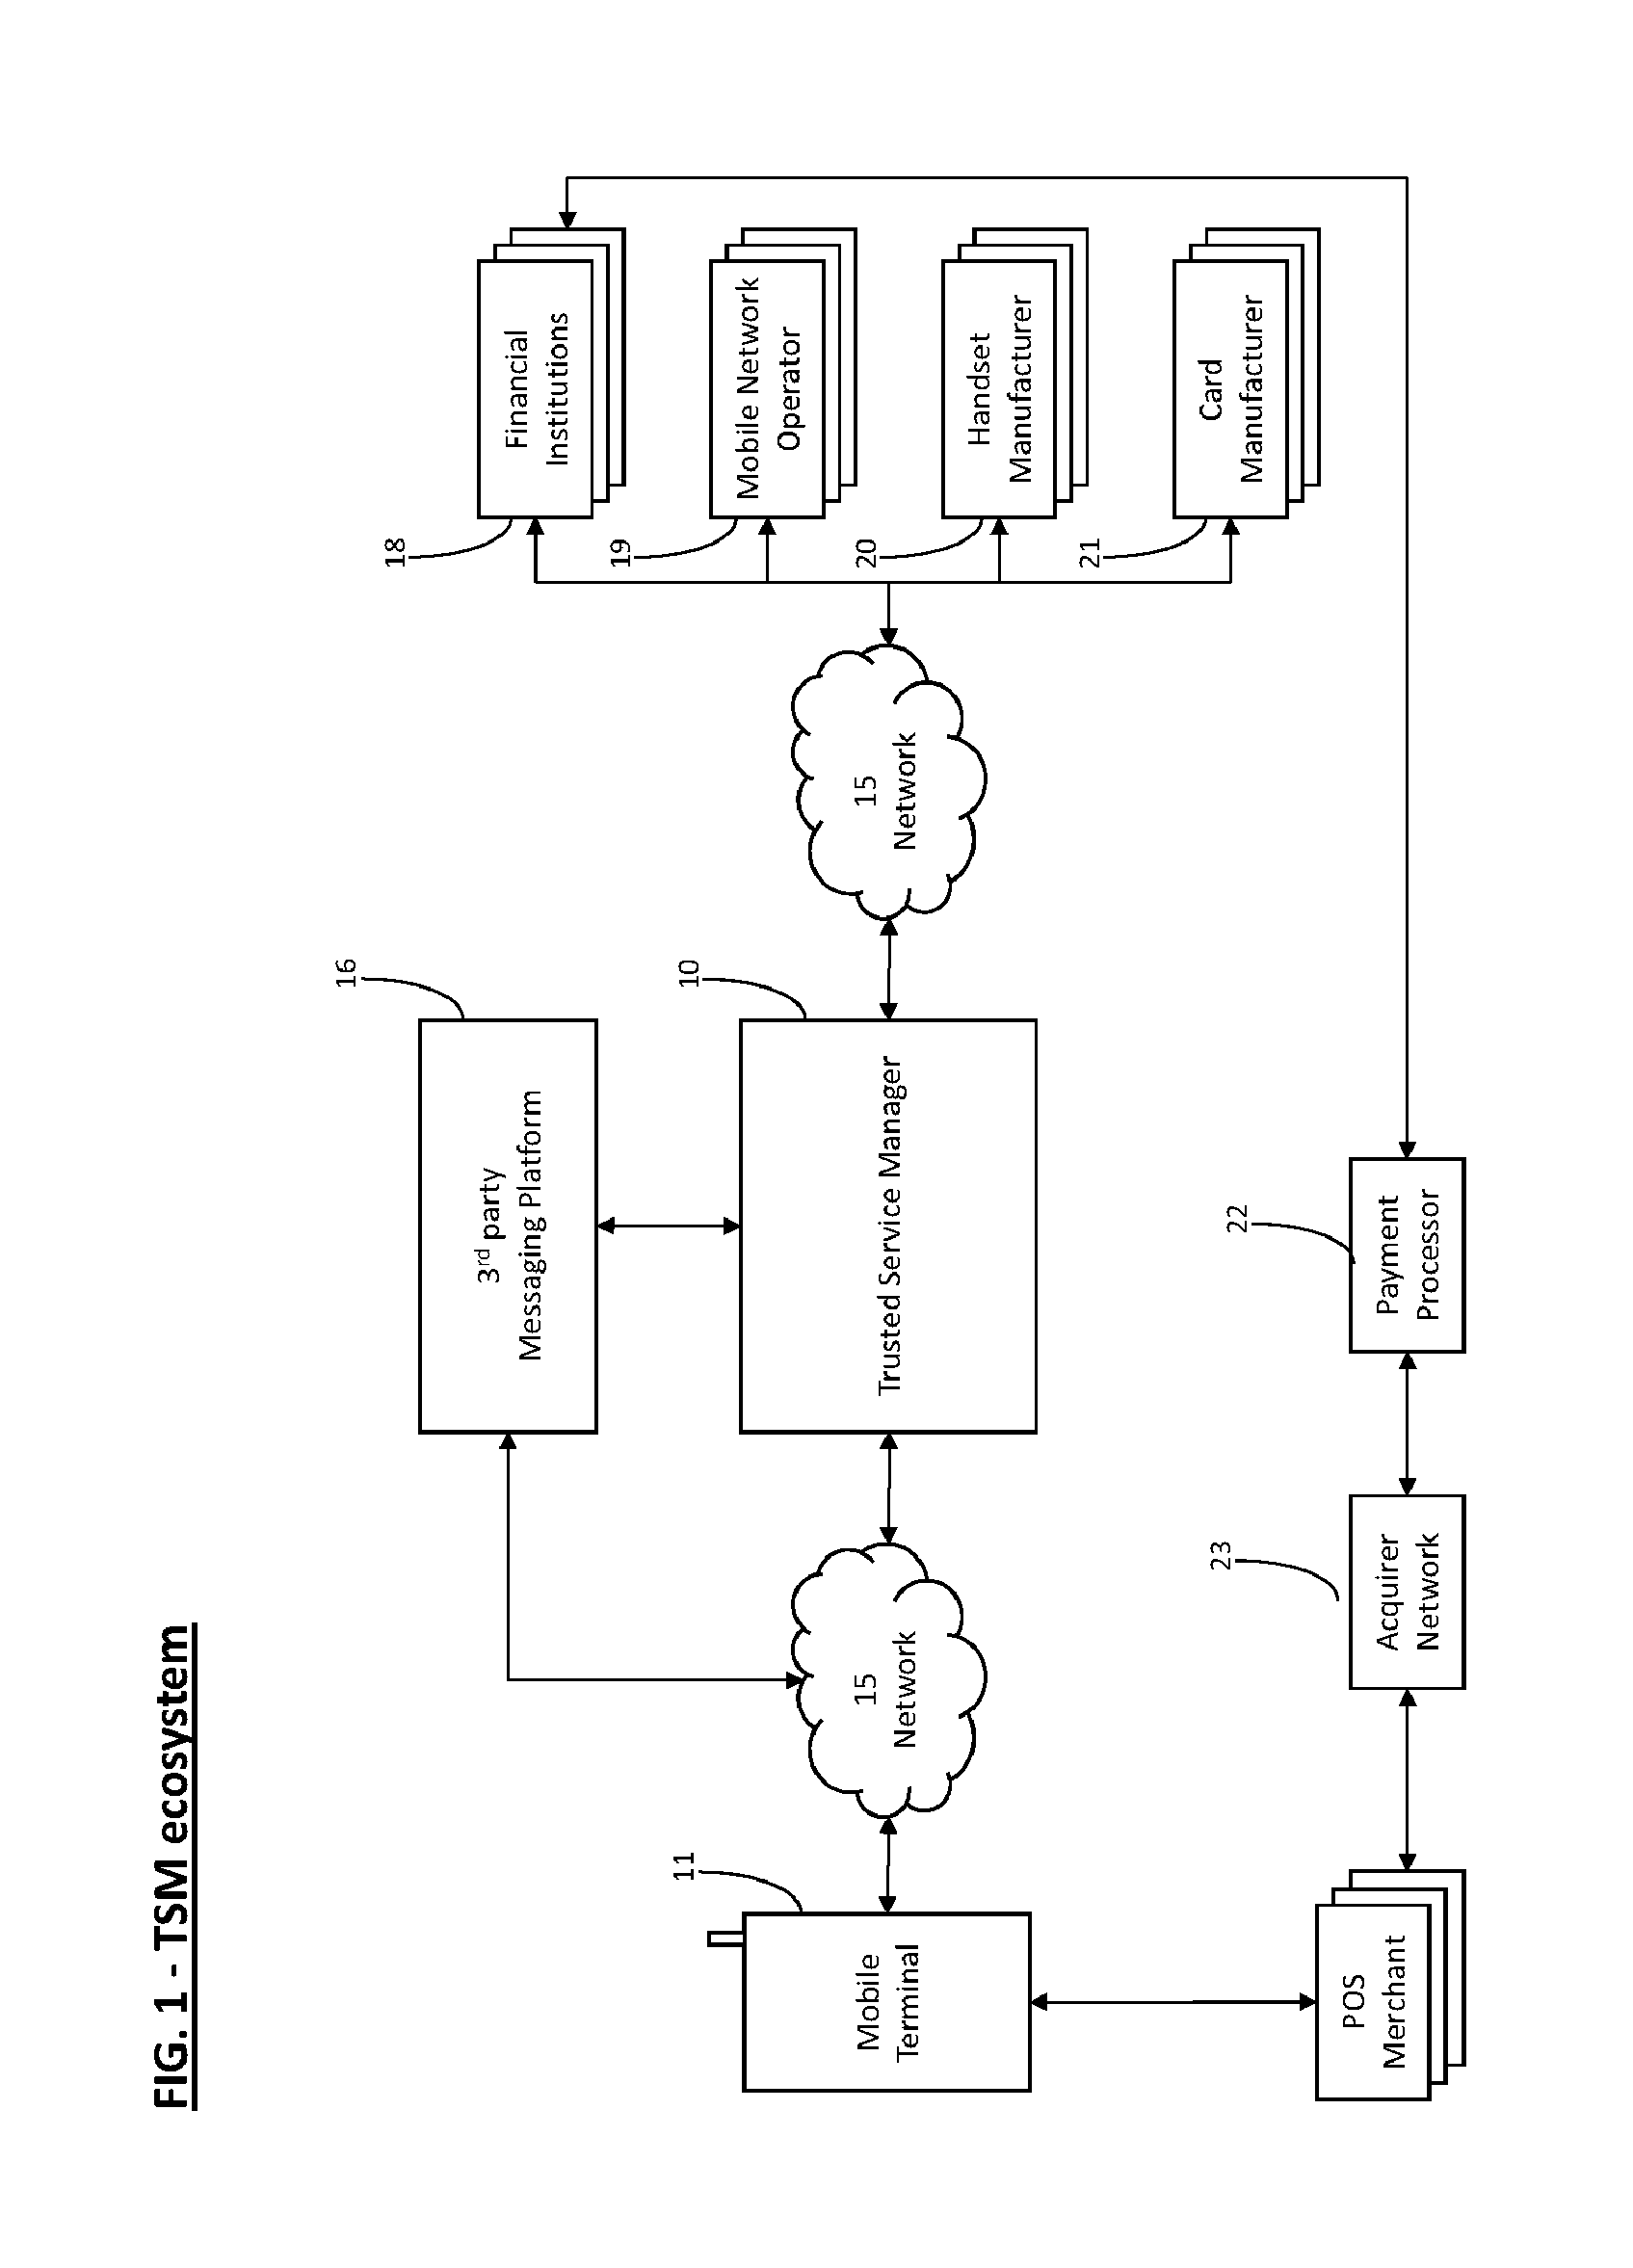 System and method for secure containment of sensitive financial information stored in a mobile communication terminal